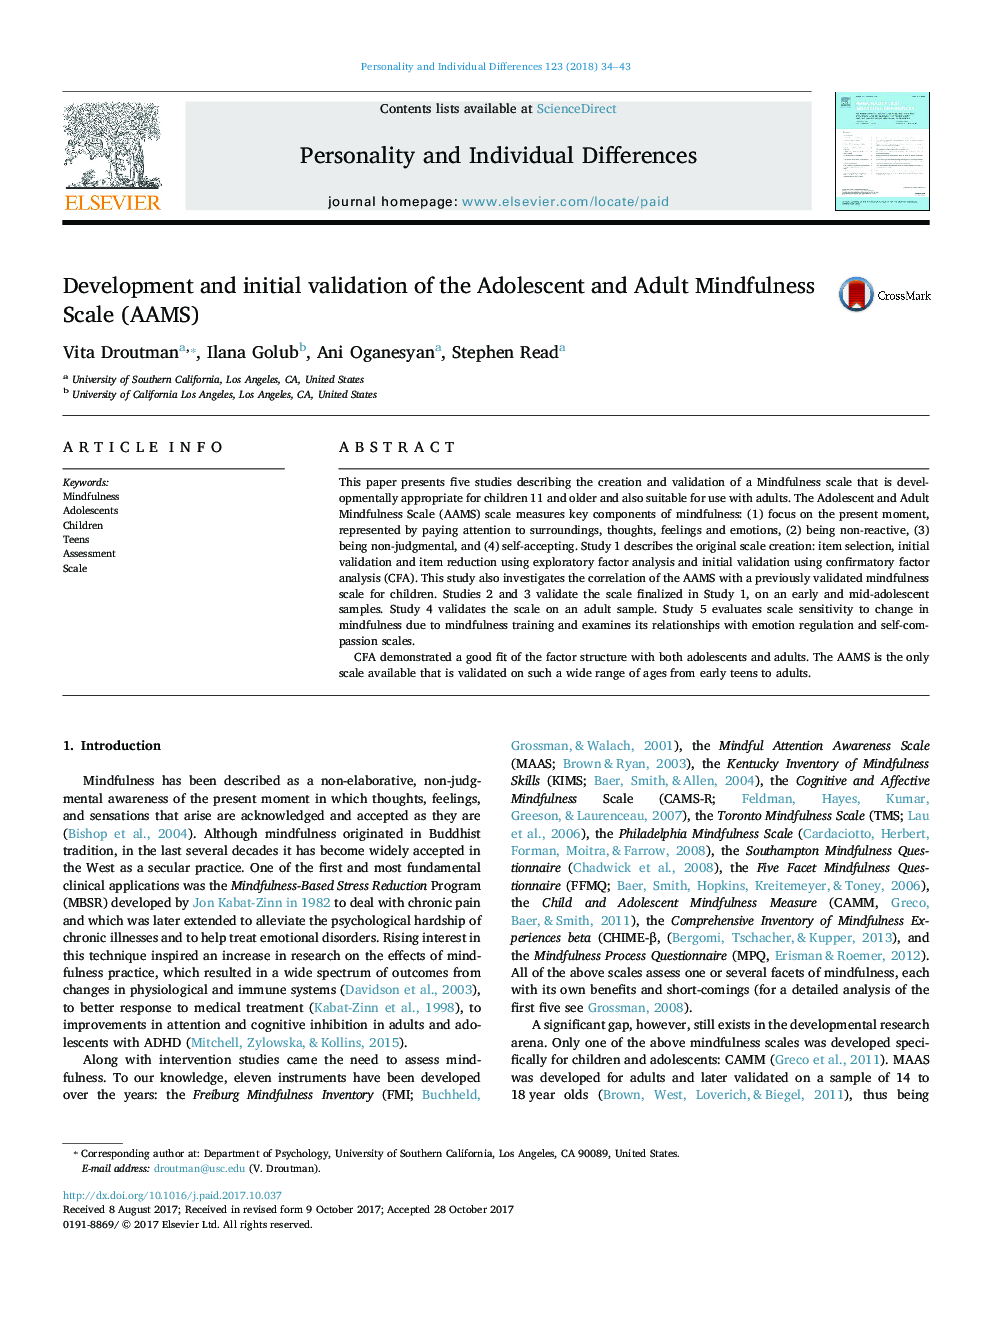 Development and initial validation of the Adolescent and Adult Mindfulness Scale (AAMS)